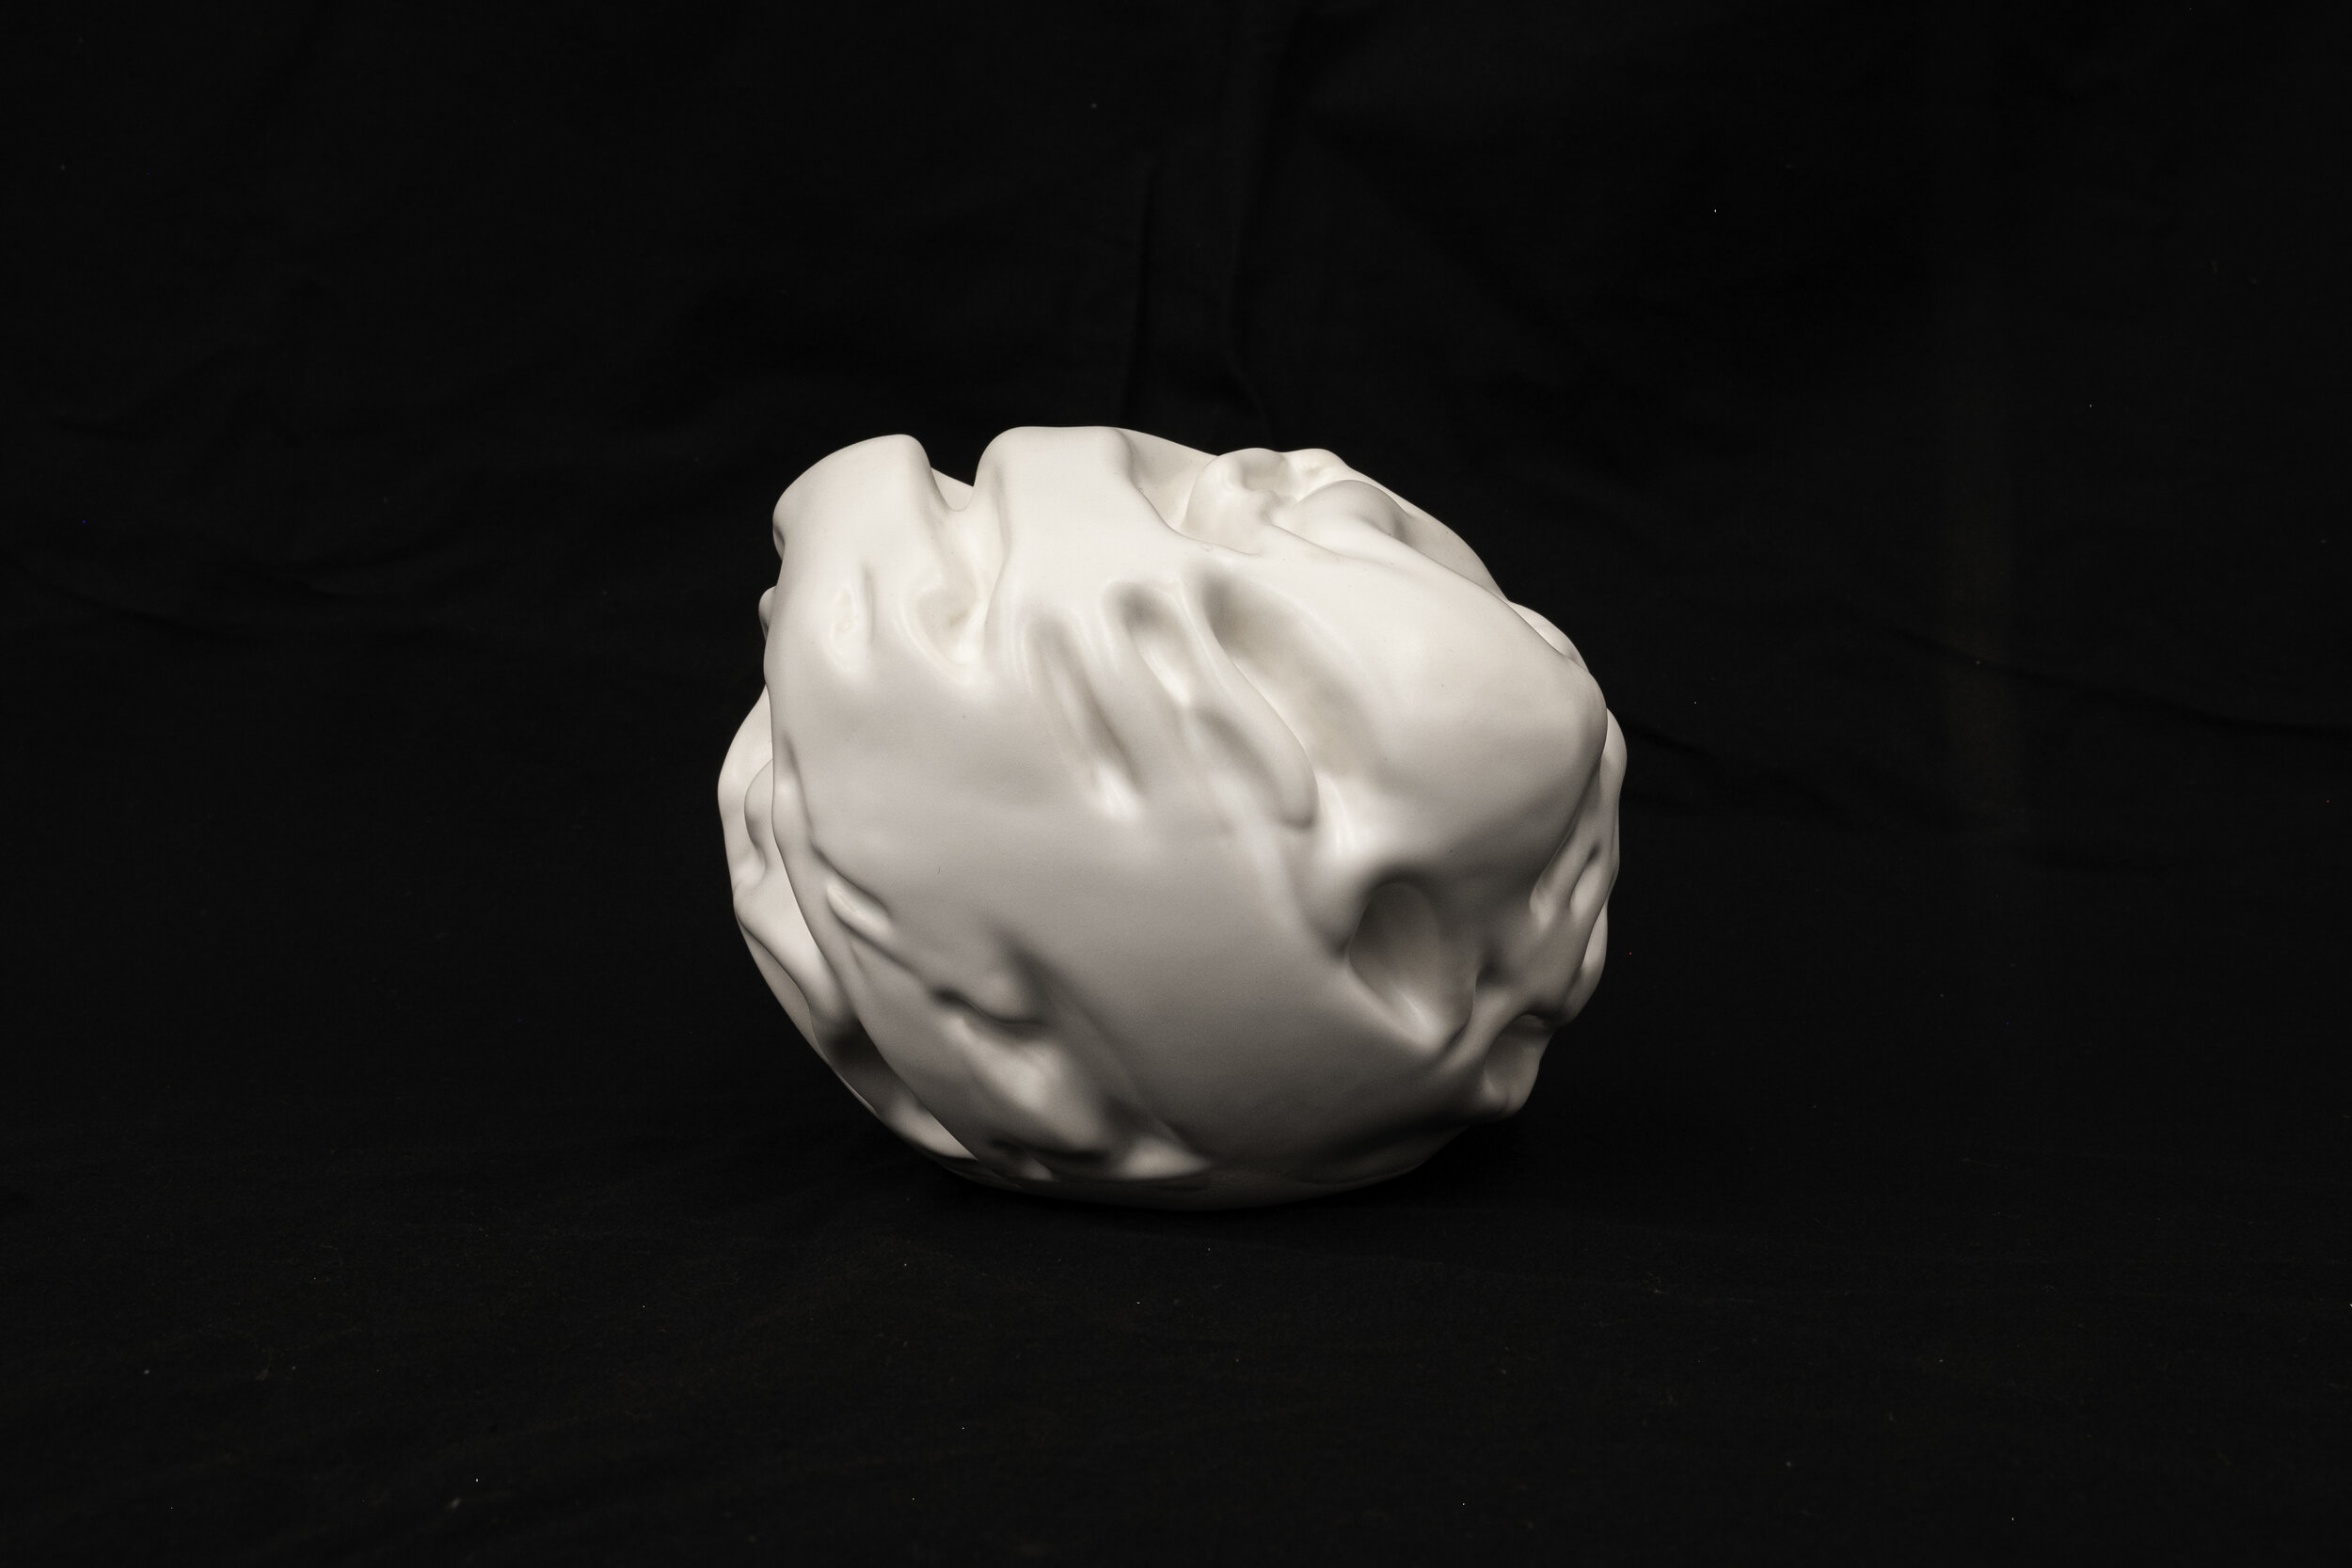   Artifact No. 10,  2019 Glazed porcelain Diameter: approximately  7 inches 